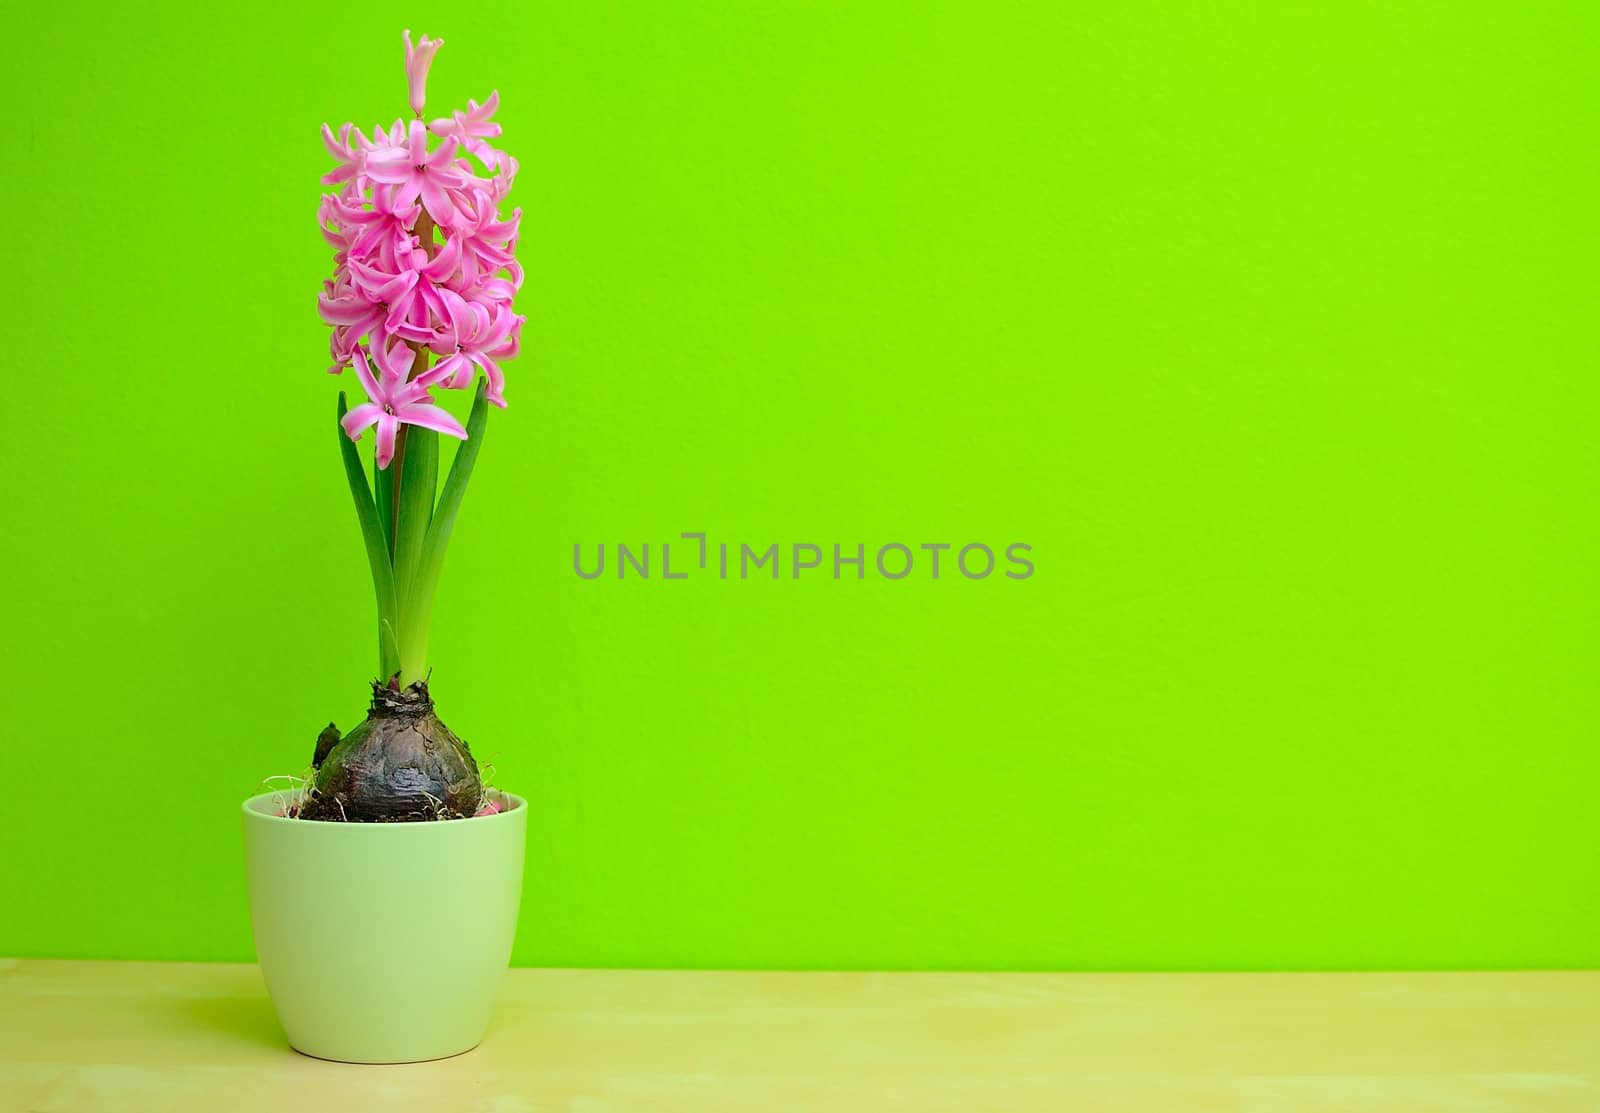 Pink Hyacinth flower in the green pot on a green background.